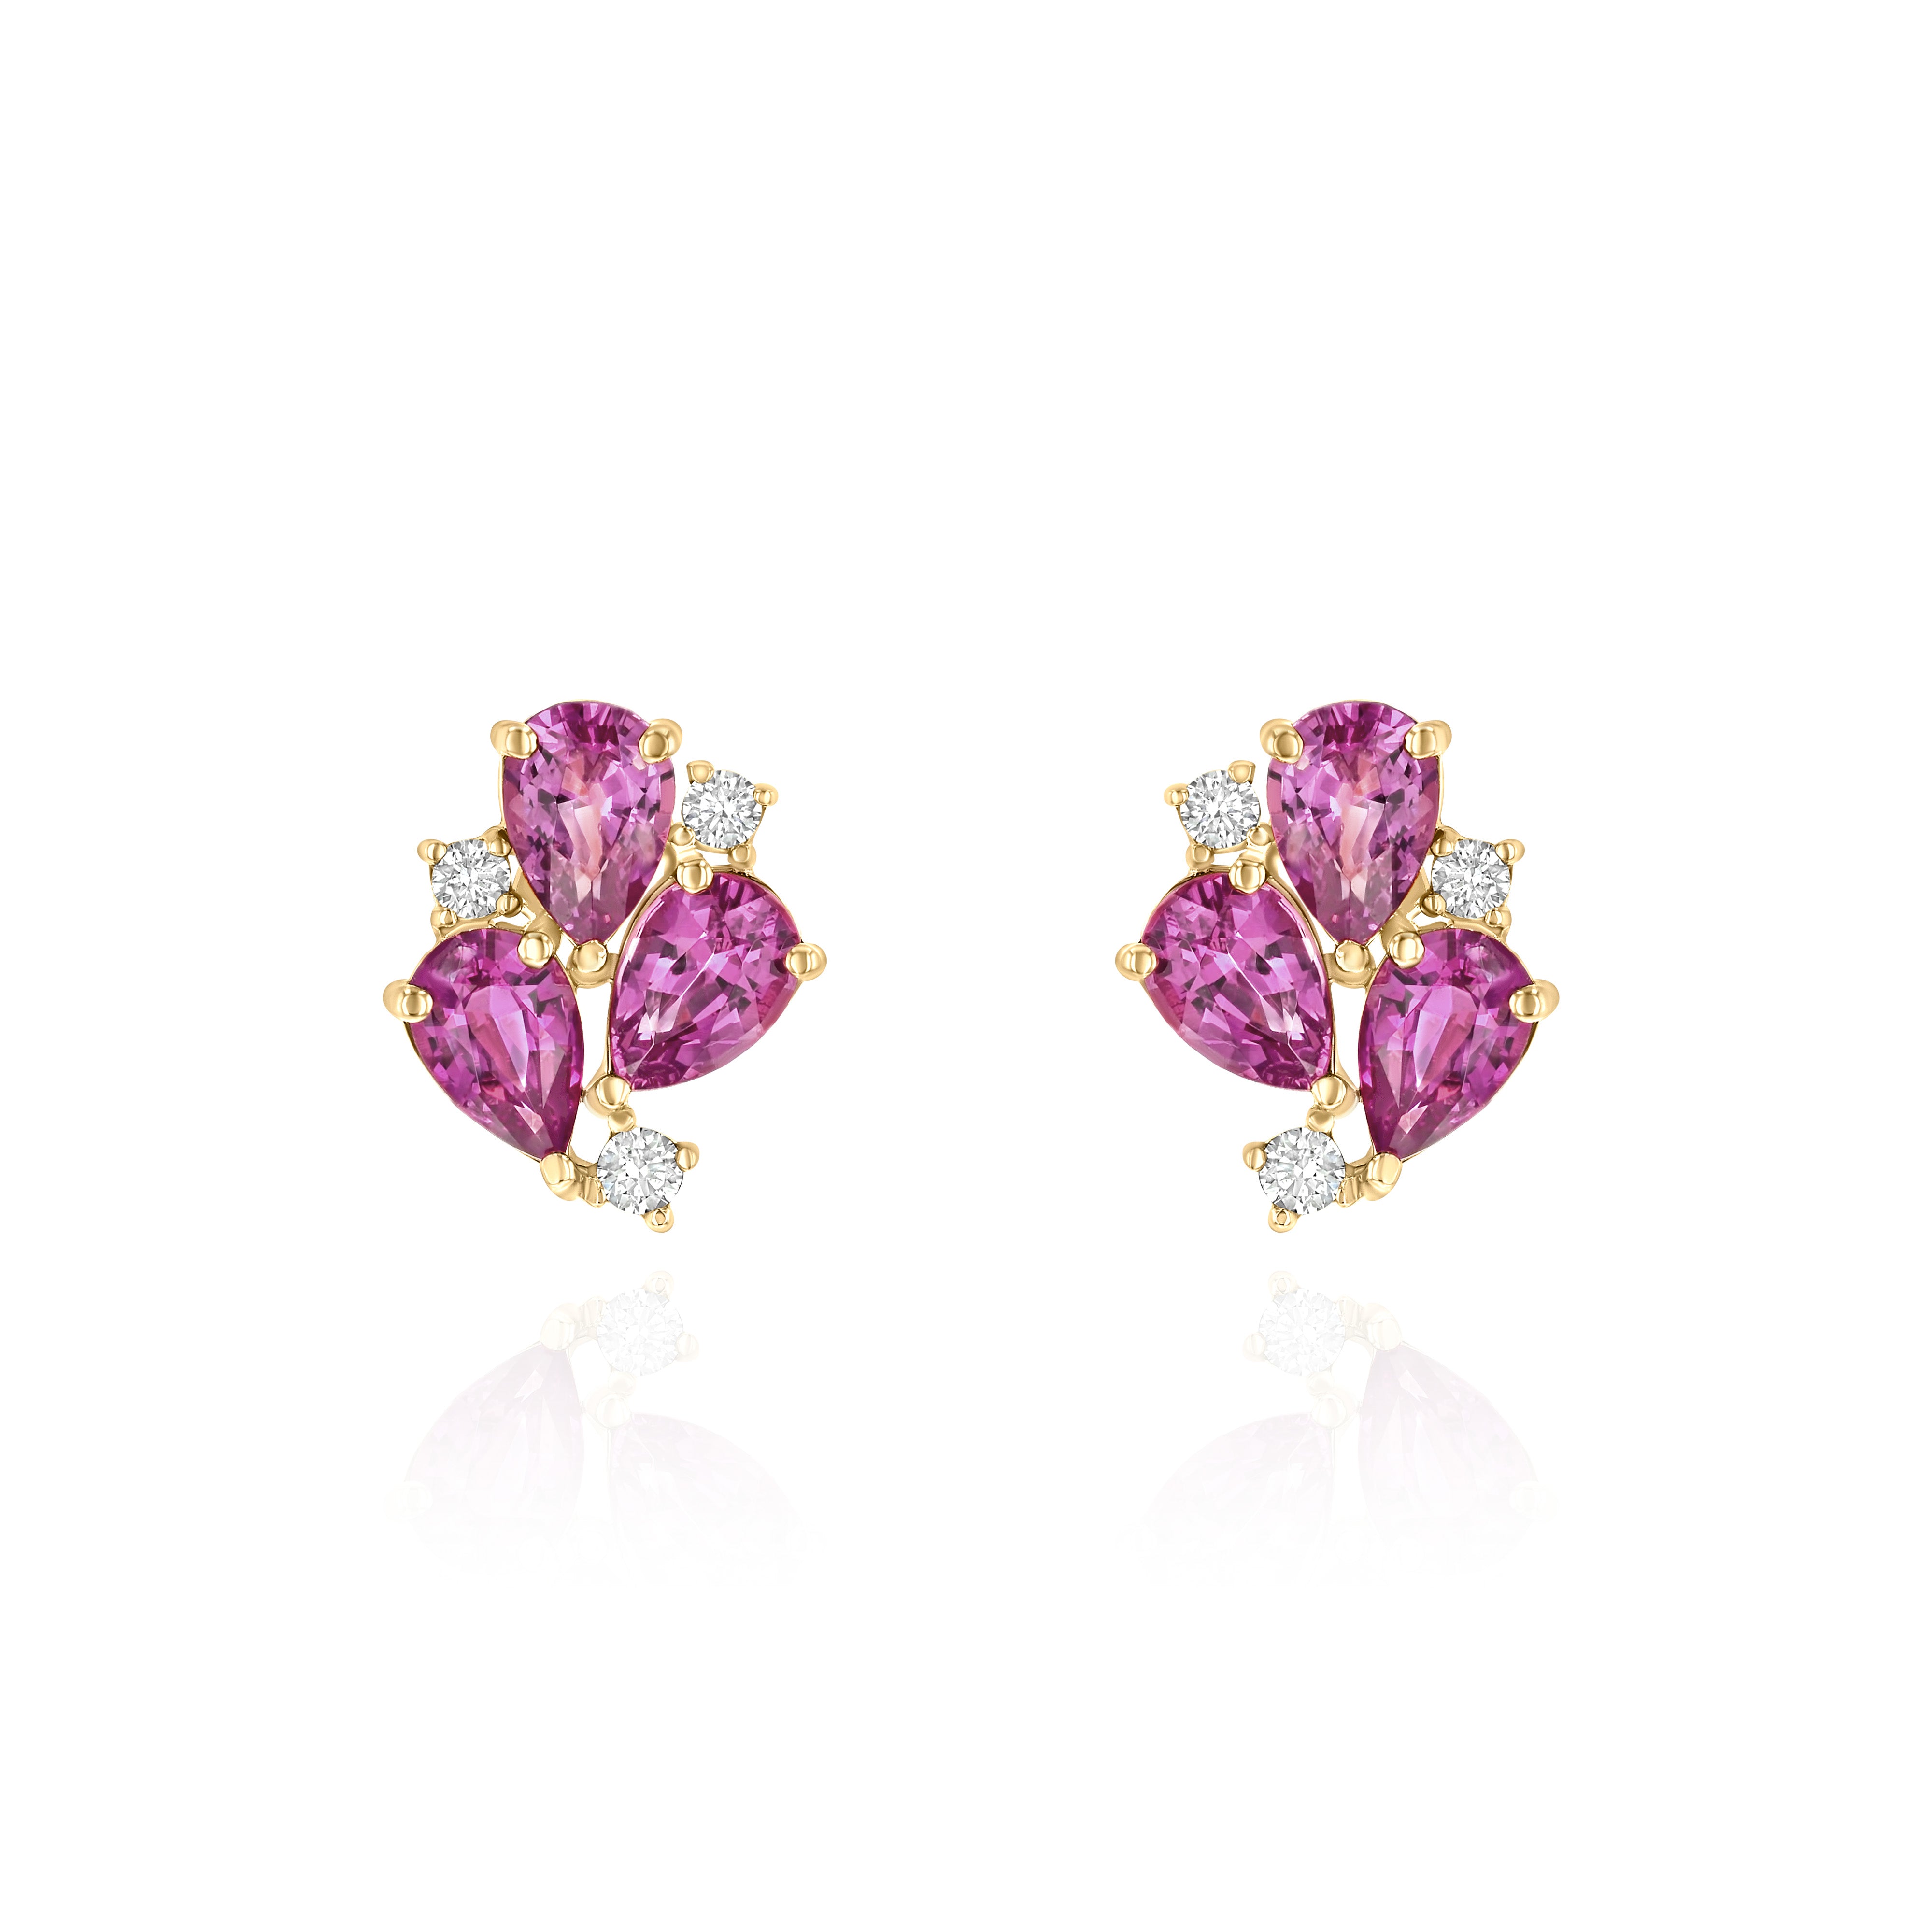 Yellow Gold Earrings with Pink Sapphires and Diamonds, Small